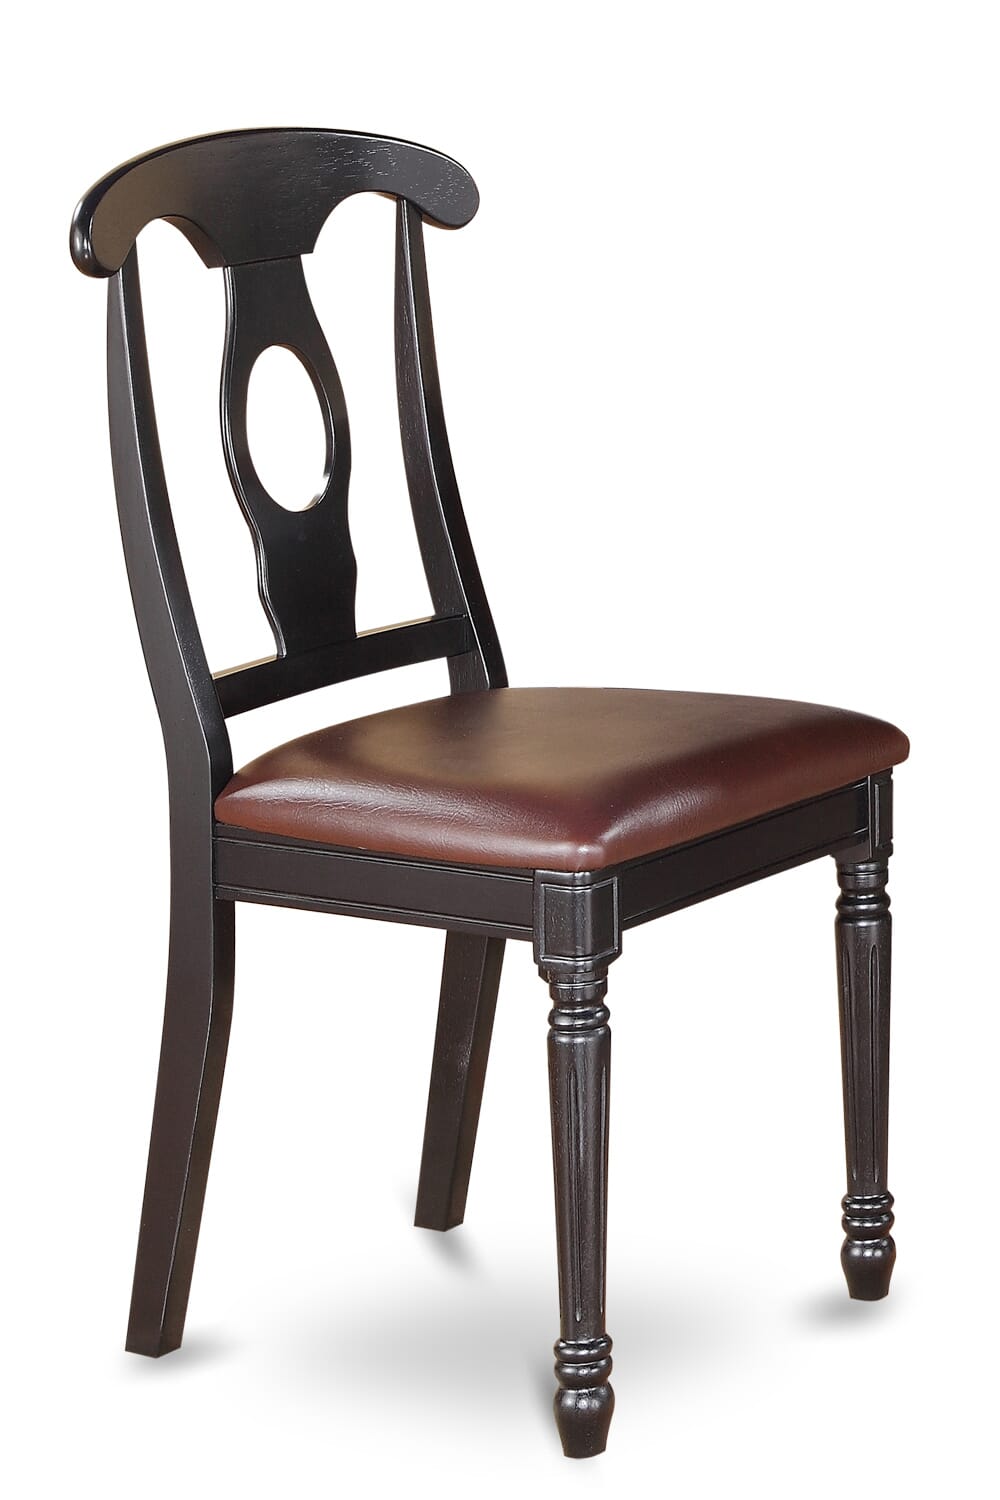 East West Furniture AMKE3-BCH-LC 3 Piece Kitchen Table & Chairs Set Contains a Round Dining Room Table with Pedestal and 2 Faux Leather Upholstered Dining Chairs, 36x36 Inch, Black & Cherry